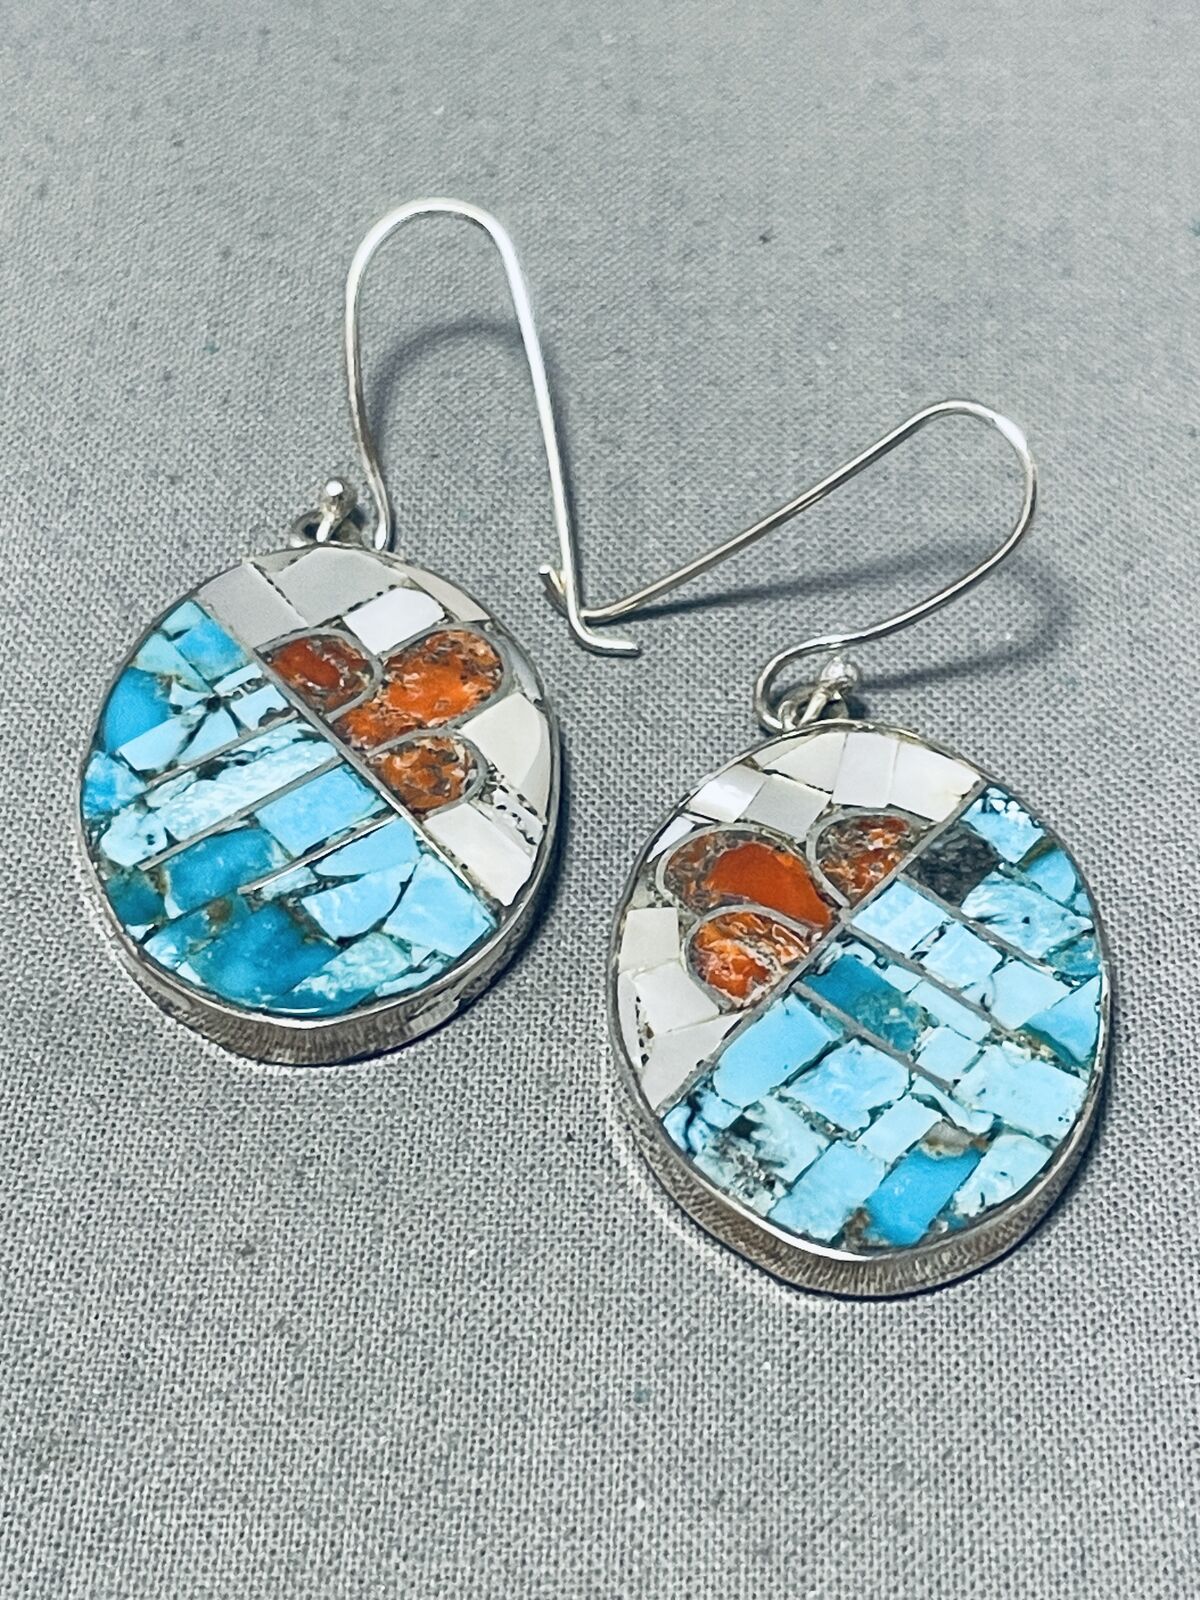 FAB VINTAGE SANTO DOMINGO JOHN AND MARY STERLING SILVER INLAY TURQUOISE EARRINGS